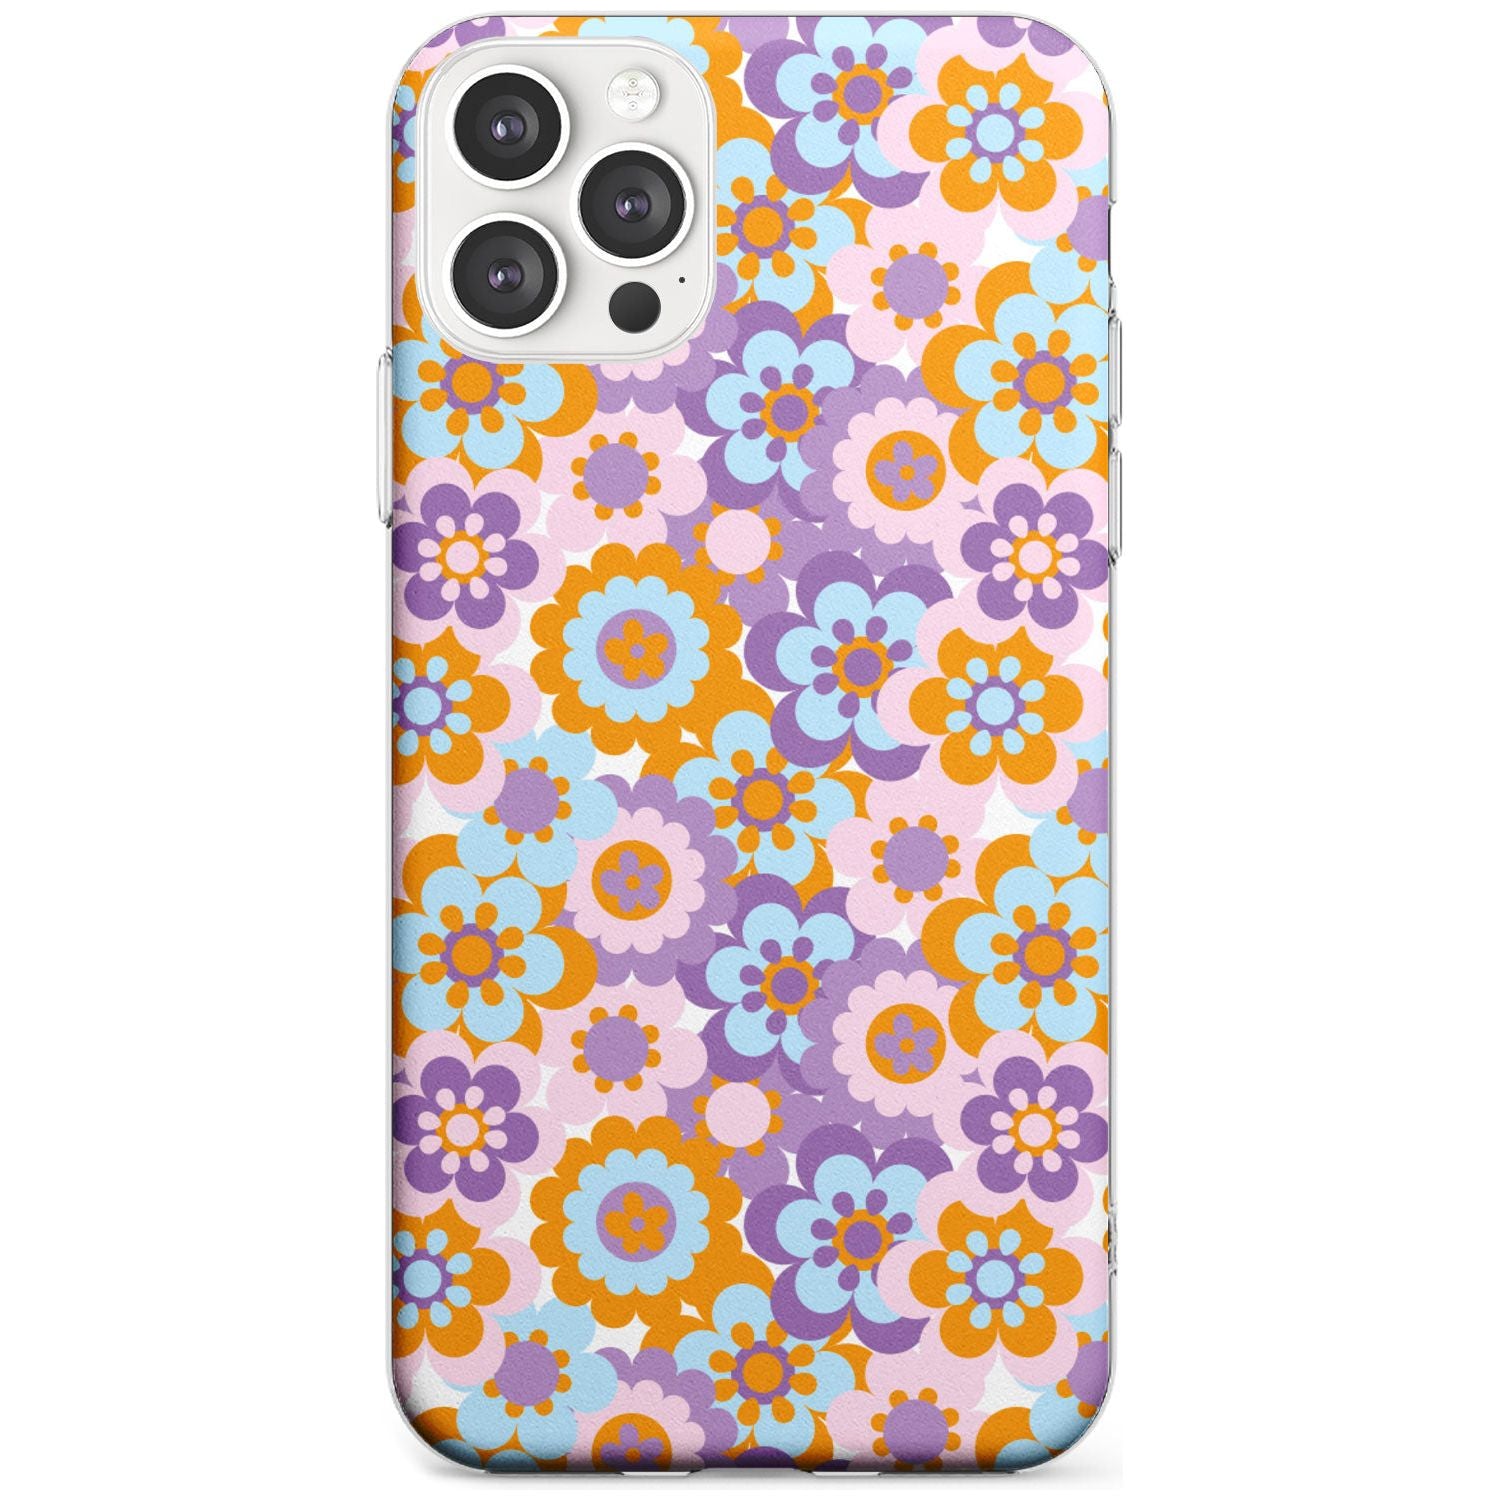 Flower Power Pattern Phone Case iPhone 12 Pro Max / Clear Case,iPhone 12 Pro / Clear Case,iPhone 11 Pro Max / Clear Case,iPhone 11 Pro / Clear Case Blanc Space